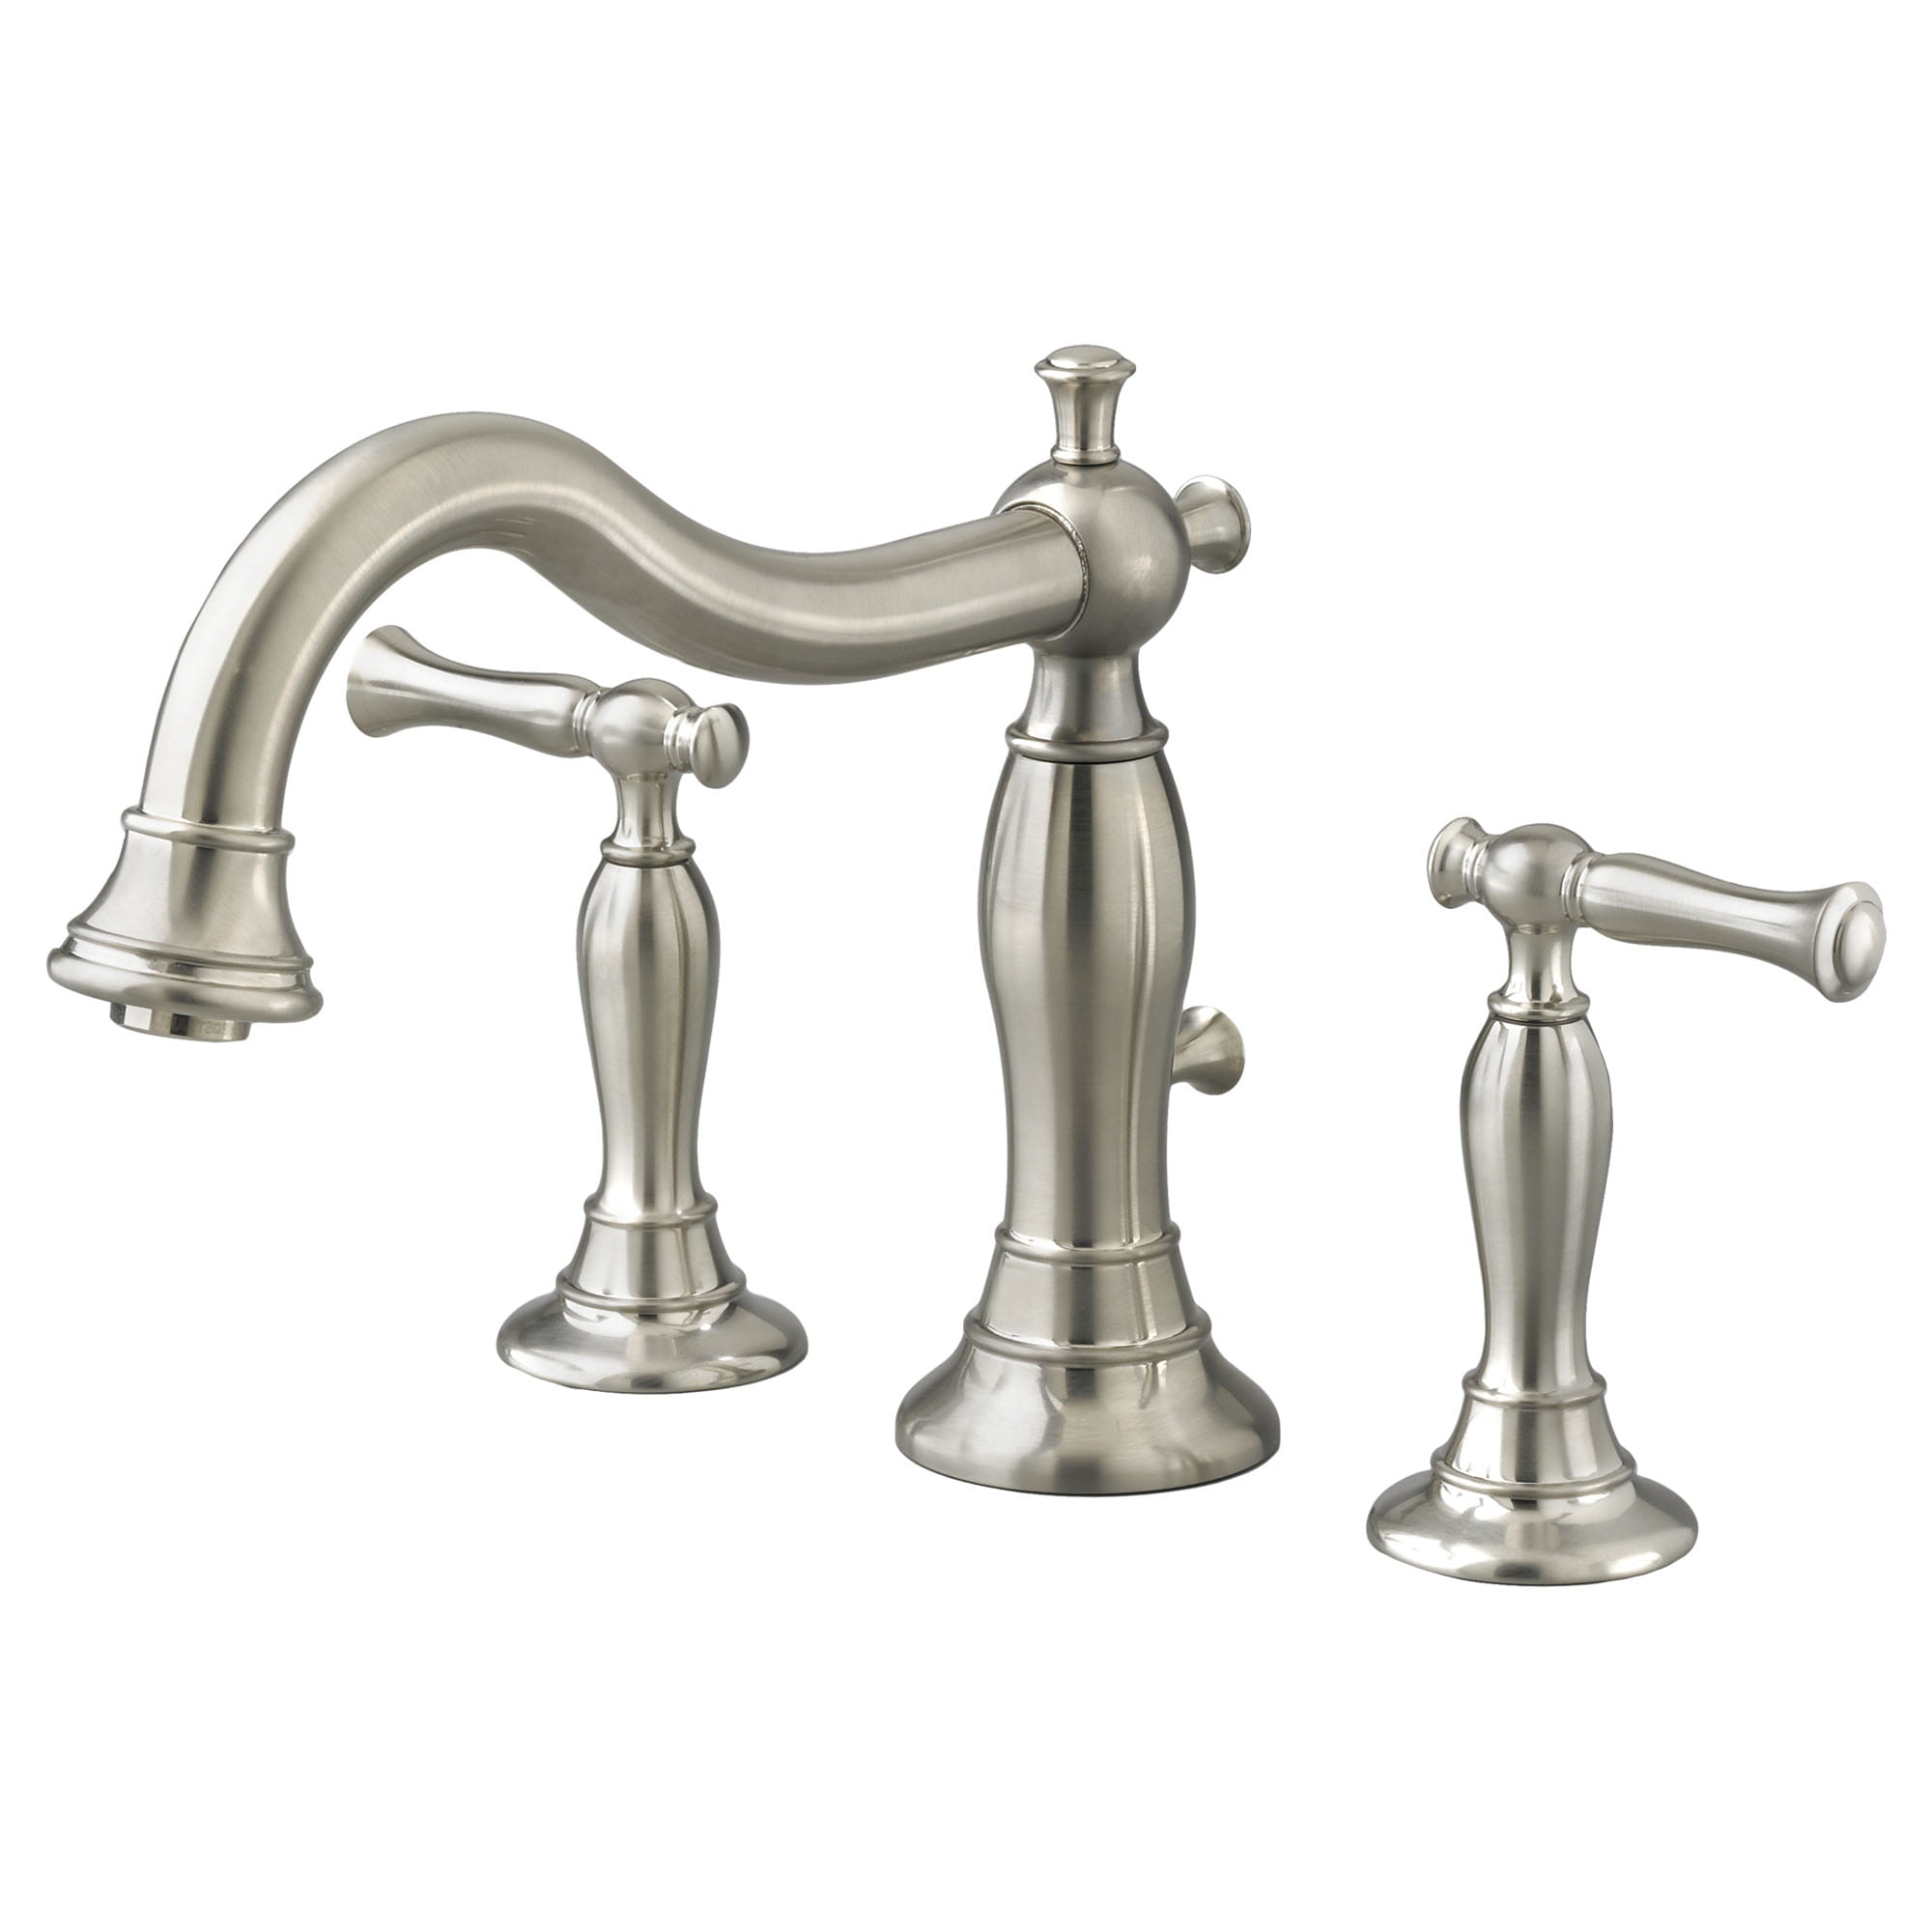 Quentin® Bathtub Faucet With Lever Handles for Flash® Rough-In Valve